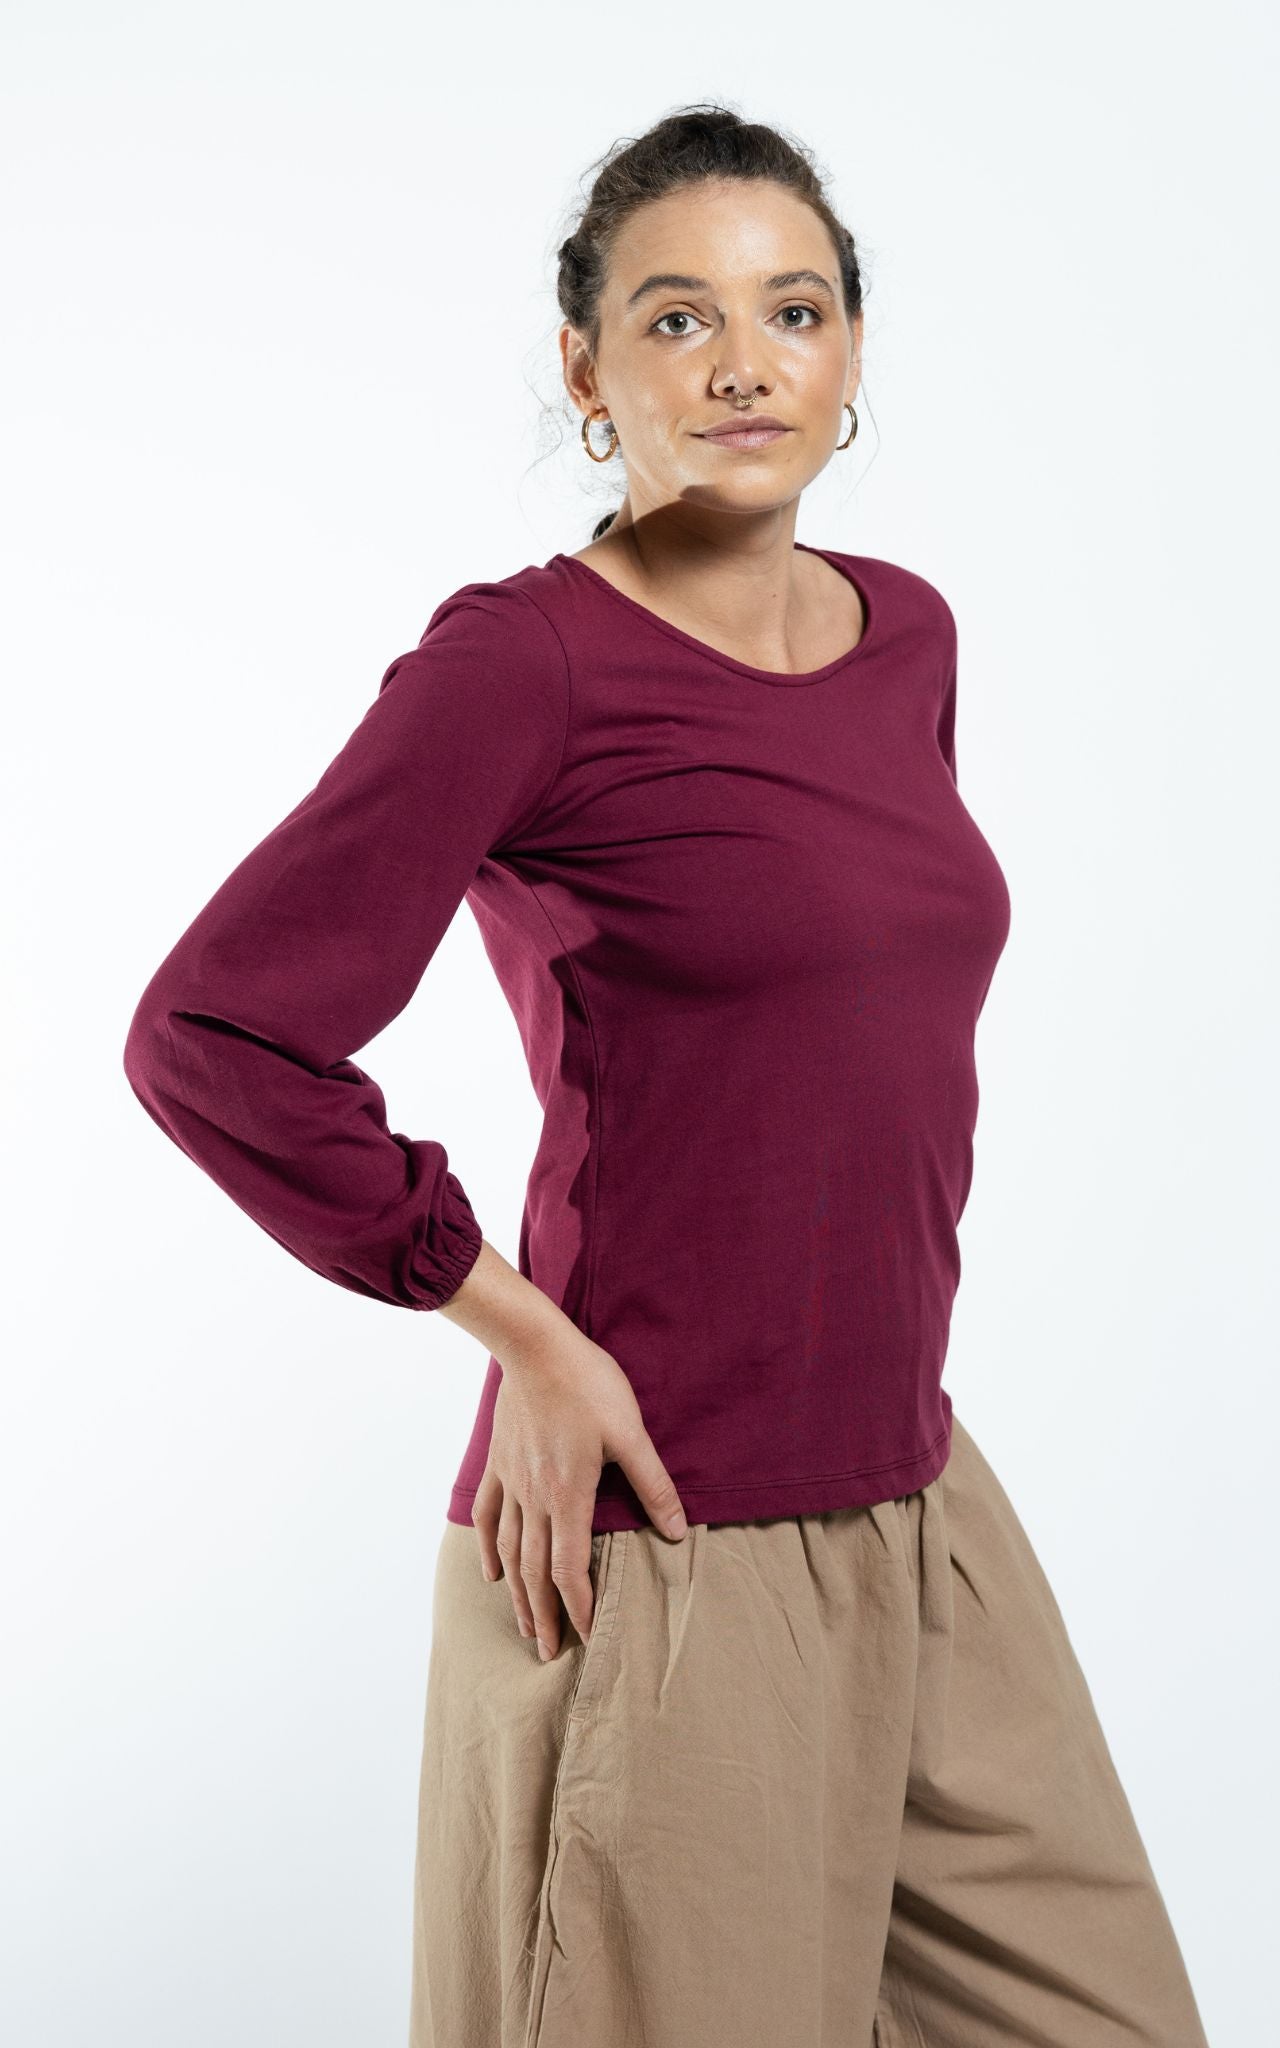 Surya The Label Ethical Organic Cotton 'Zoé' Top made in Nepal - Berry